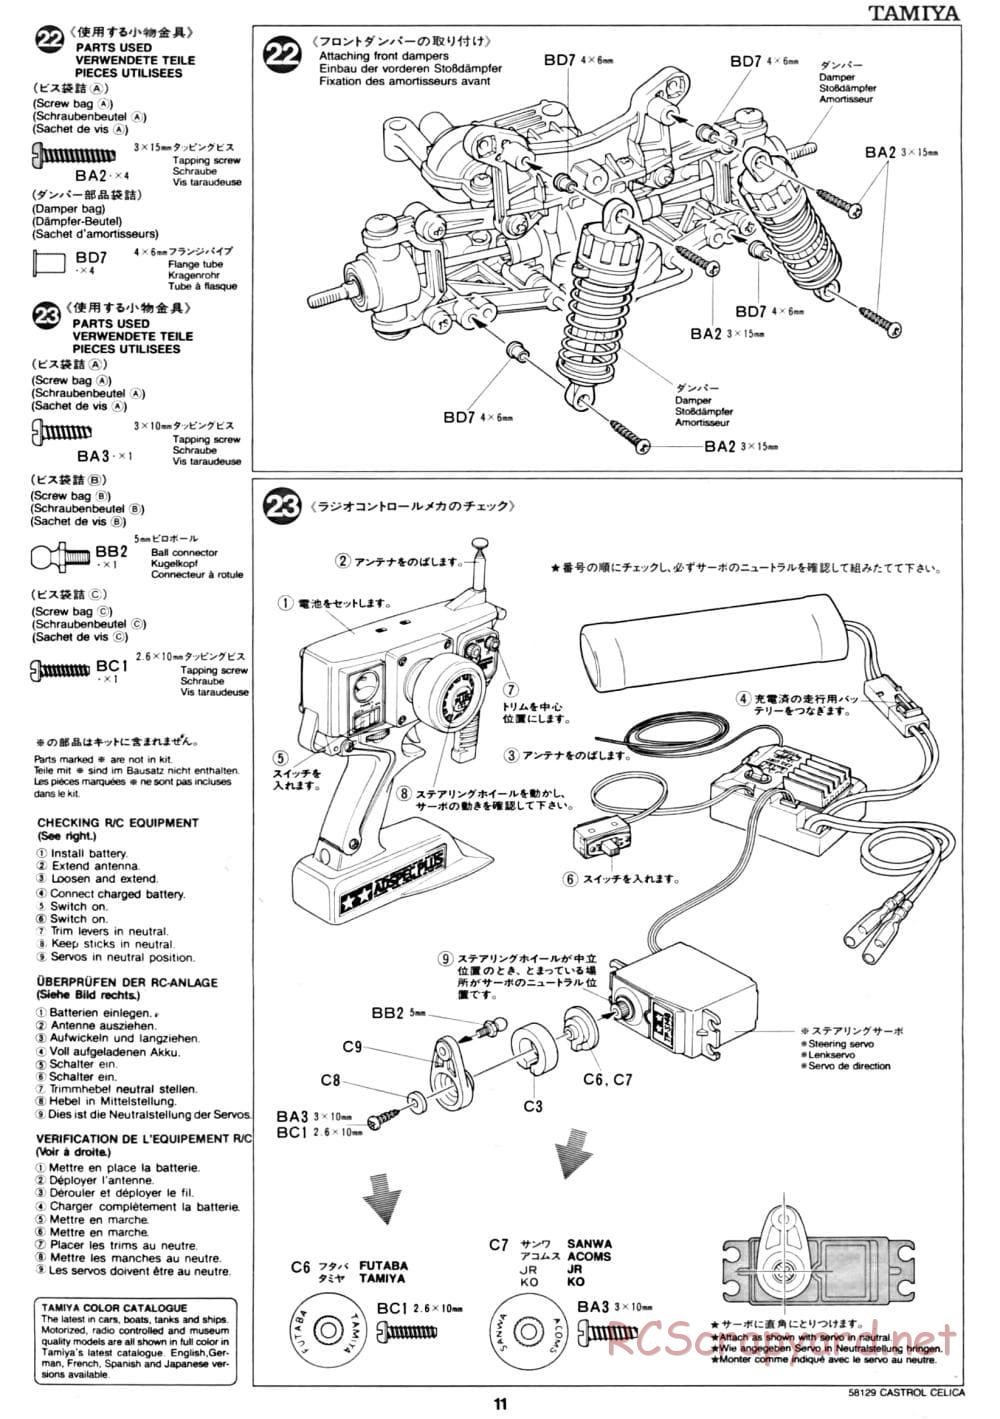 Tamiya - Castrol Celica 93 Monte-Carlo - TA-02 Chassis - Manual - Page 11